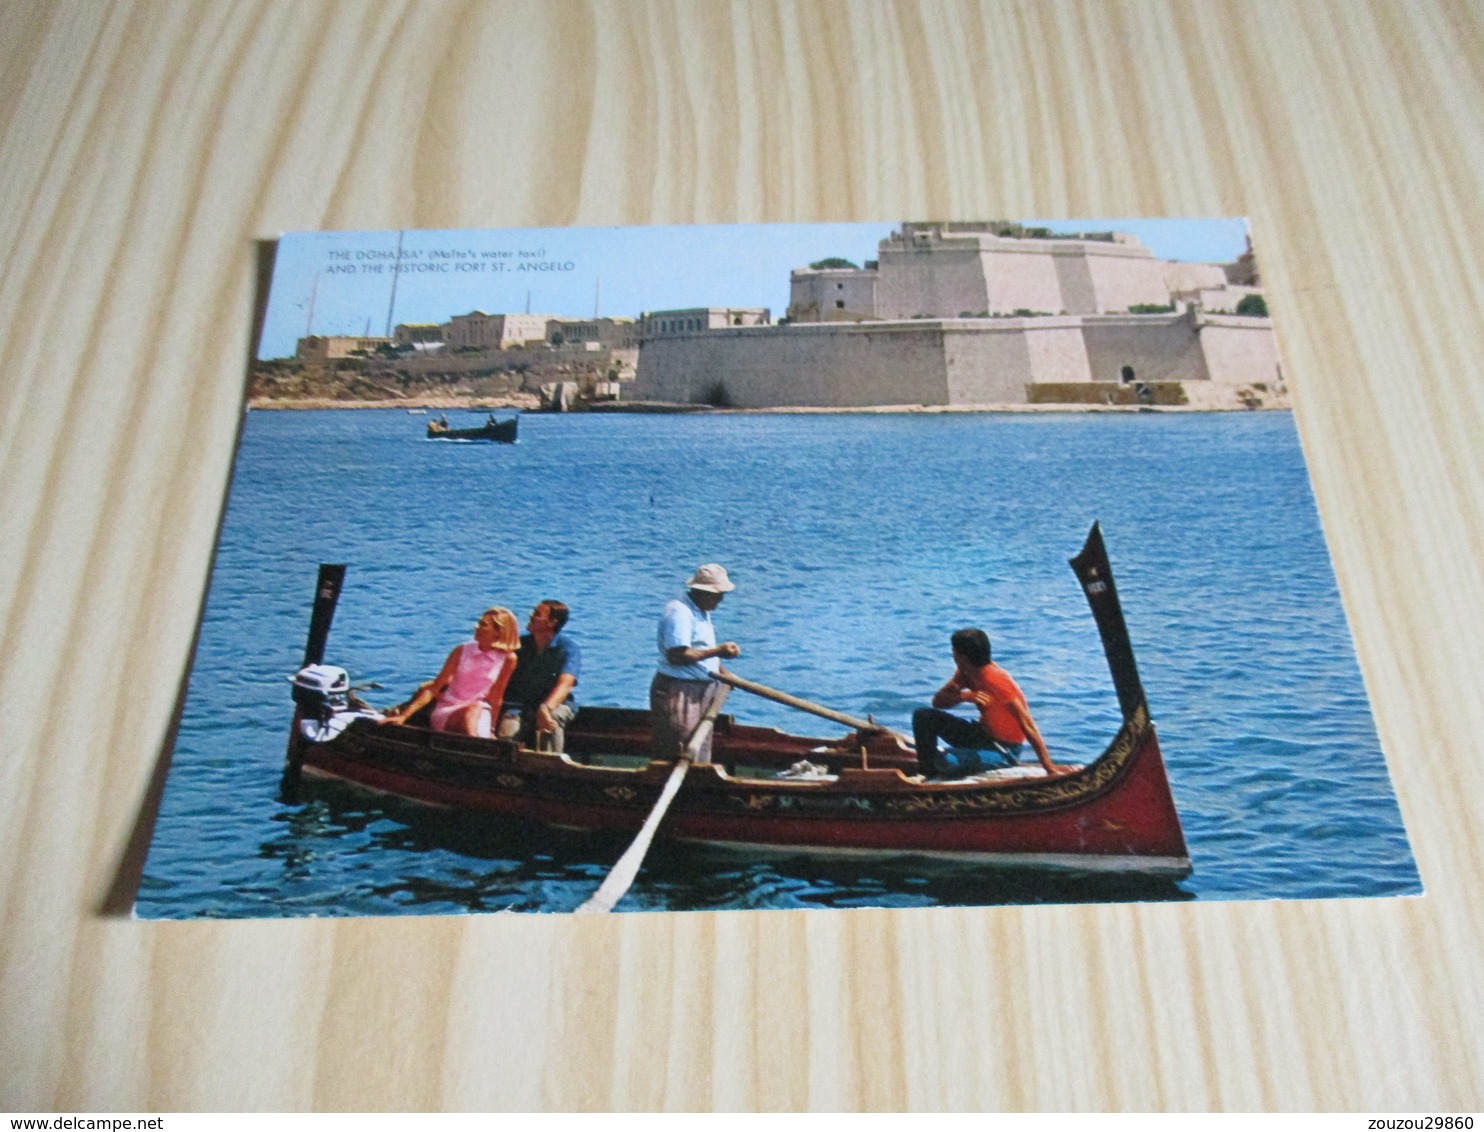 Malta - The Dghajsa' (Malta's Water Taxi) And The Historic Fort St. Angelo. - Malta